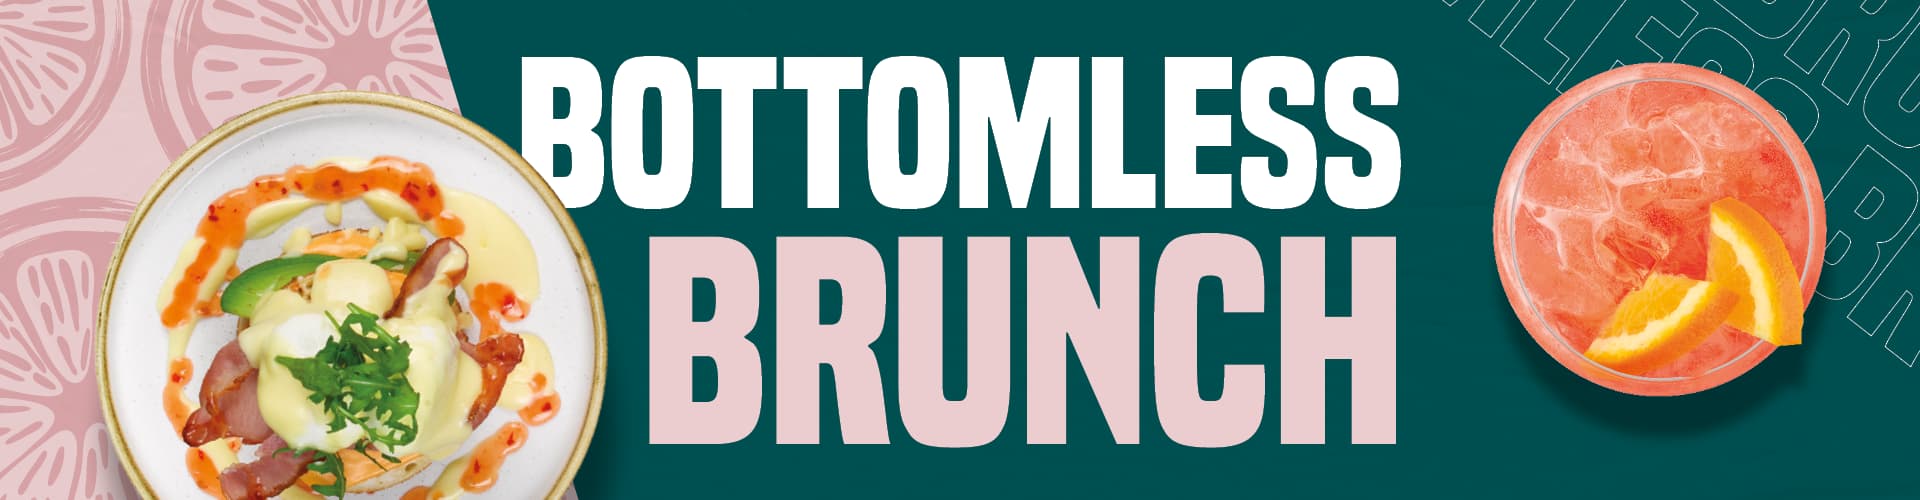 Bottomless Brunch with cocktails